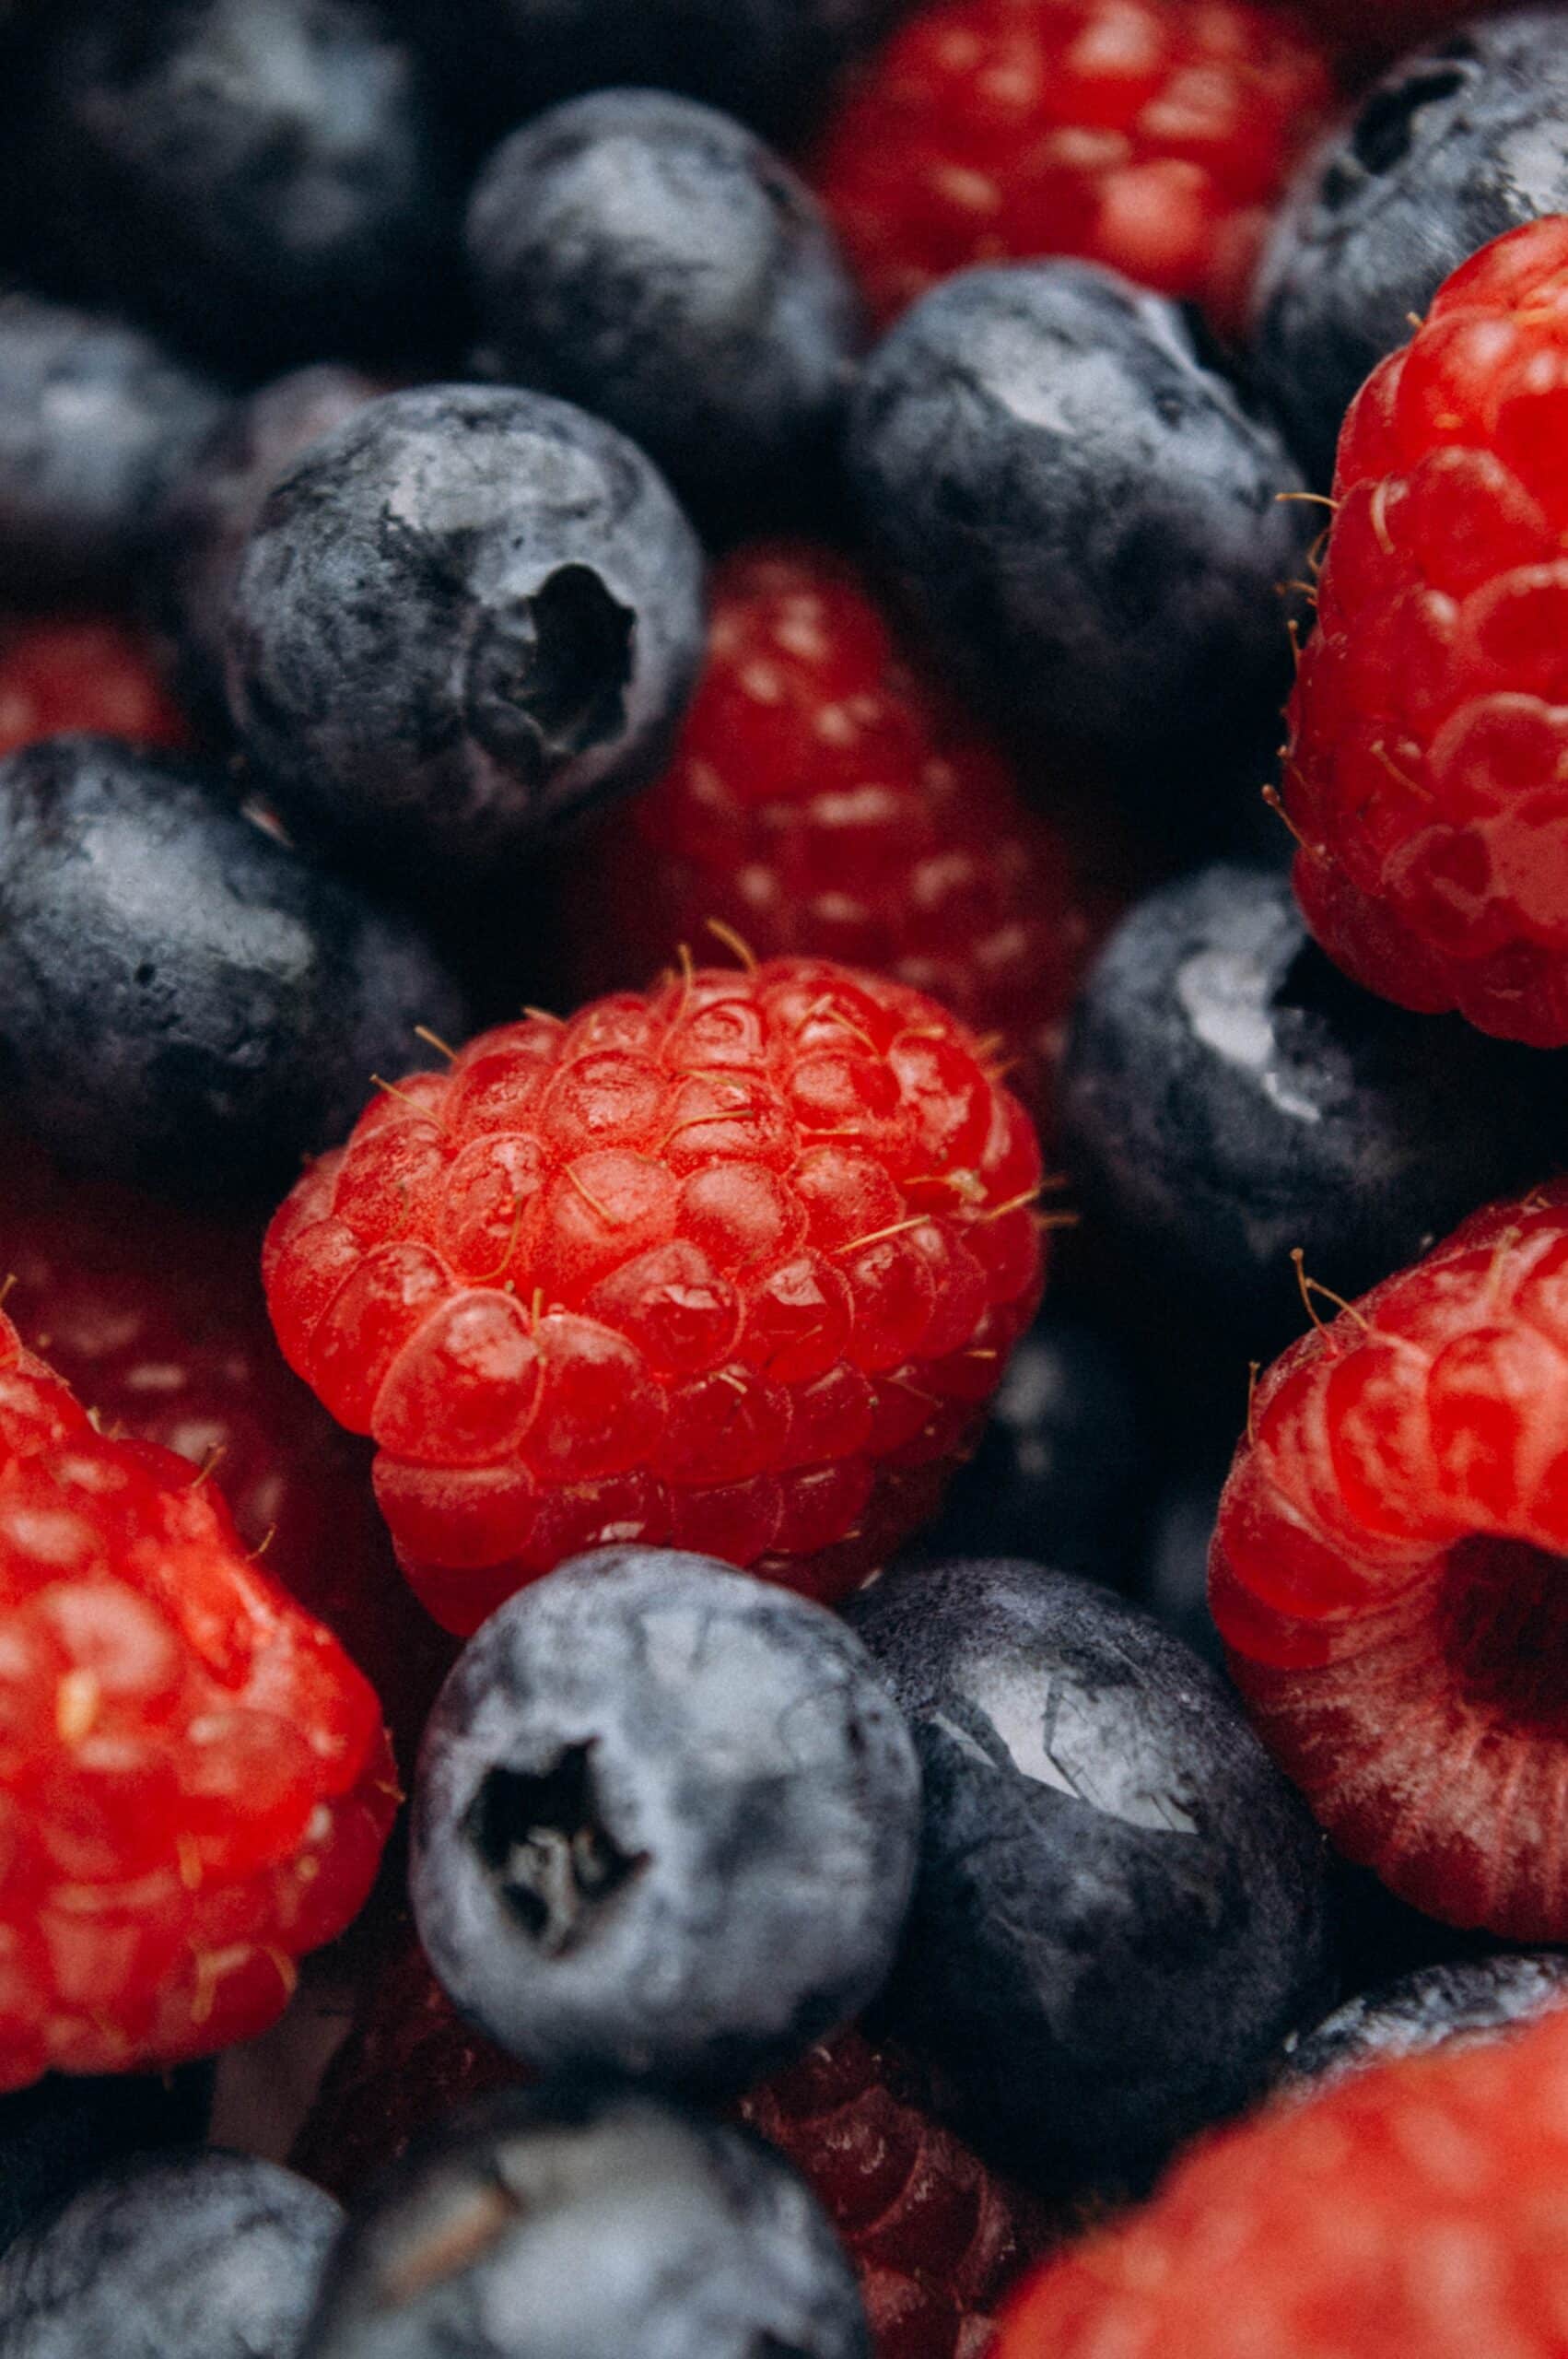 Raspberries and Blueberries - Benefits of Freeze Drying Your Food 